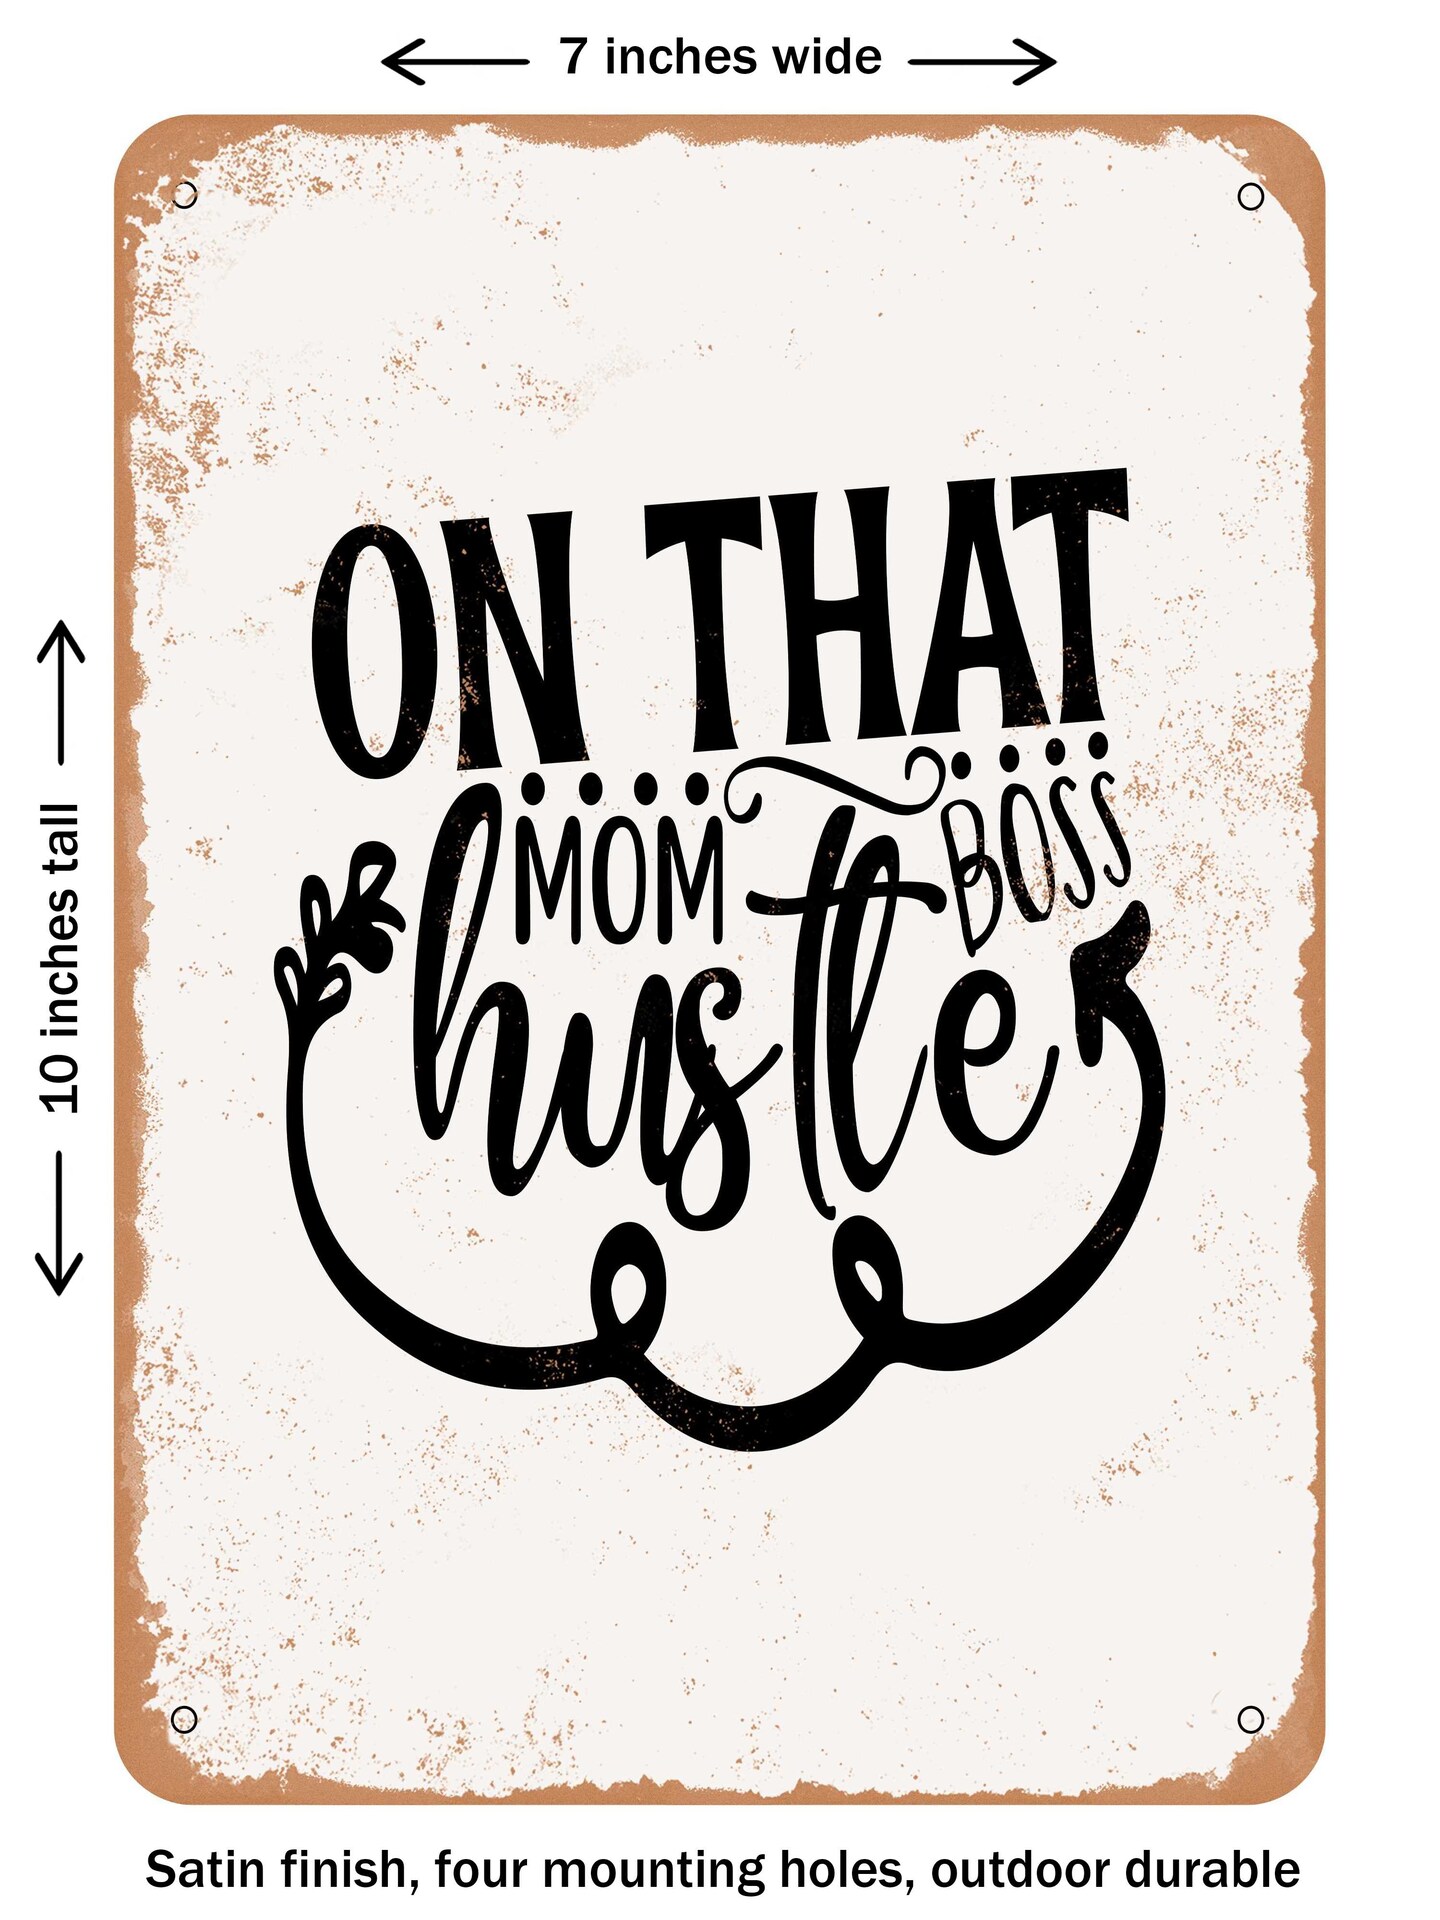 DECORATIVE METAL SIGN - On That Mom Boss Hustle - 3  - Vintage Rusty Look